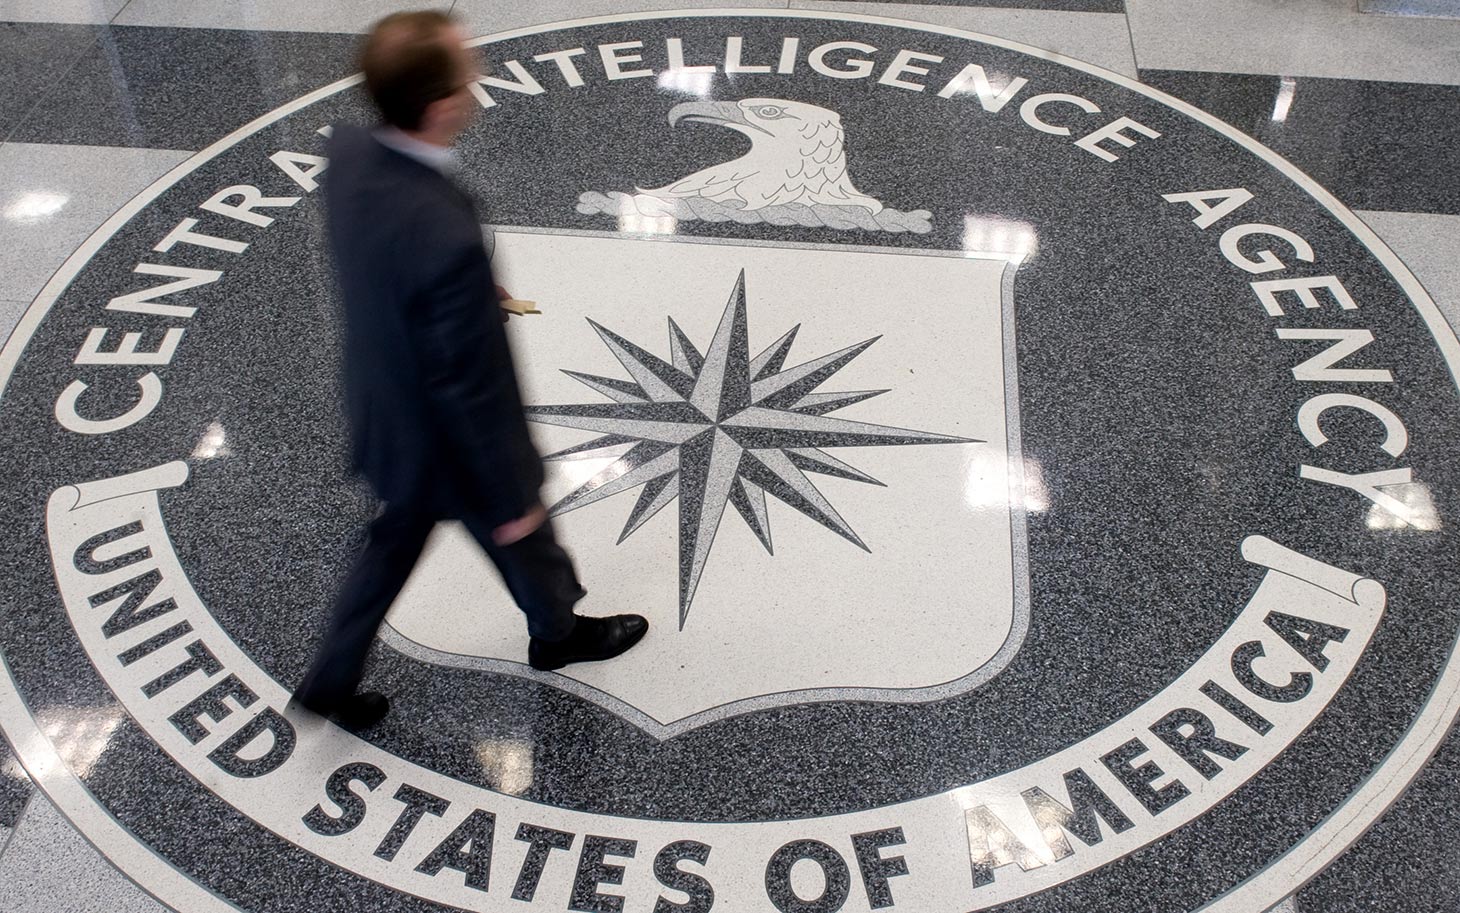 A man crosses the Central Intelligence Agency (CIA) logo in the lobby of CIA Headquarters in Langley, Virginia, on August 14, 2008. AFP PHOTO/SAUL LOEB (Photo credit should read SAUL LOEB/AFP/Getty Images)